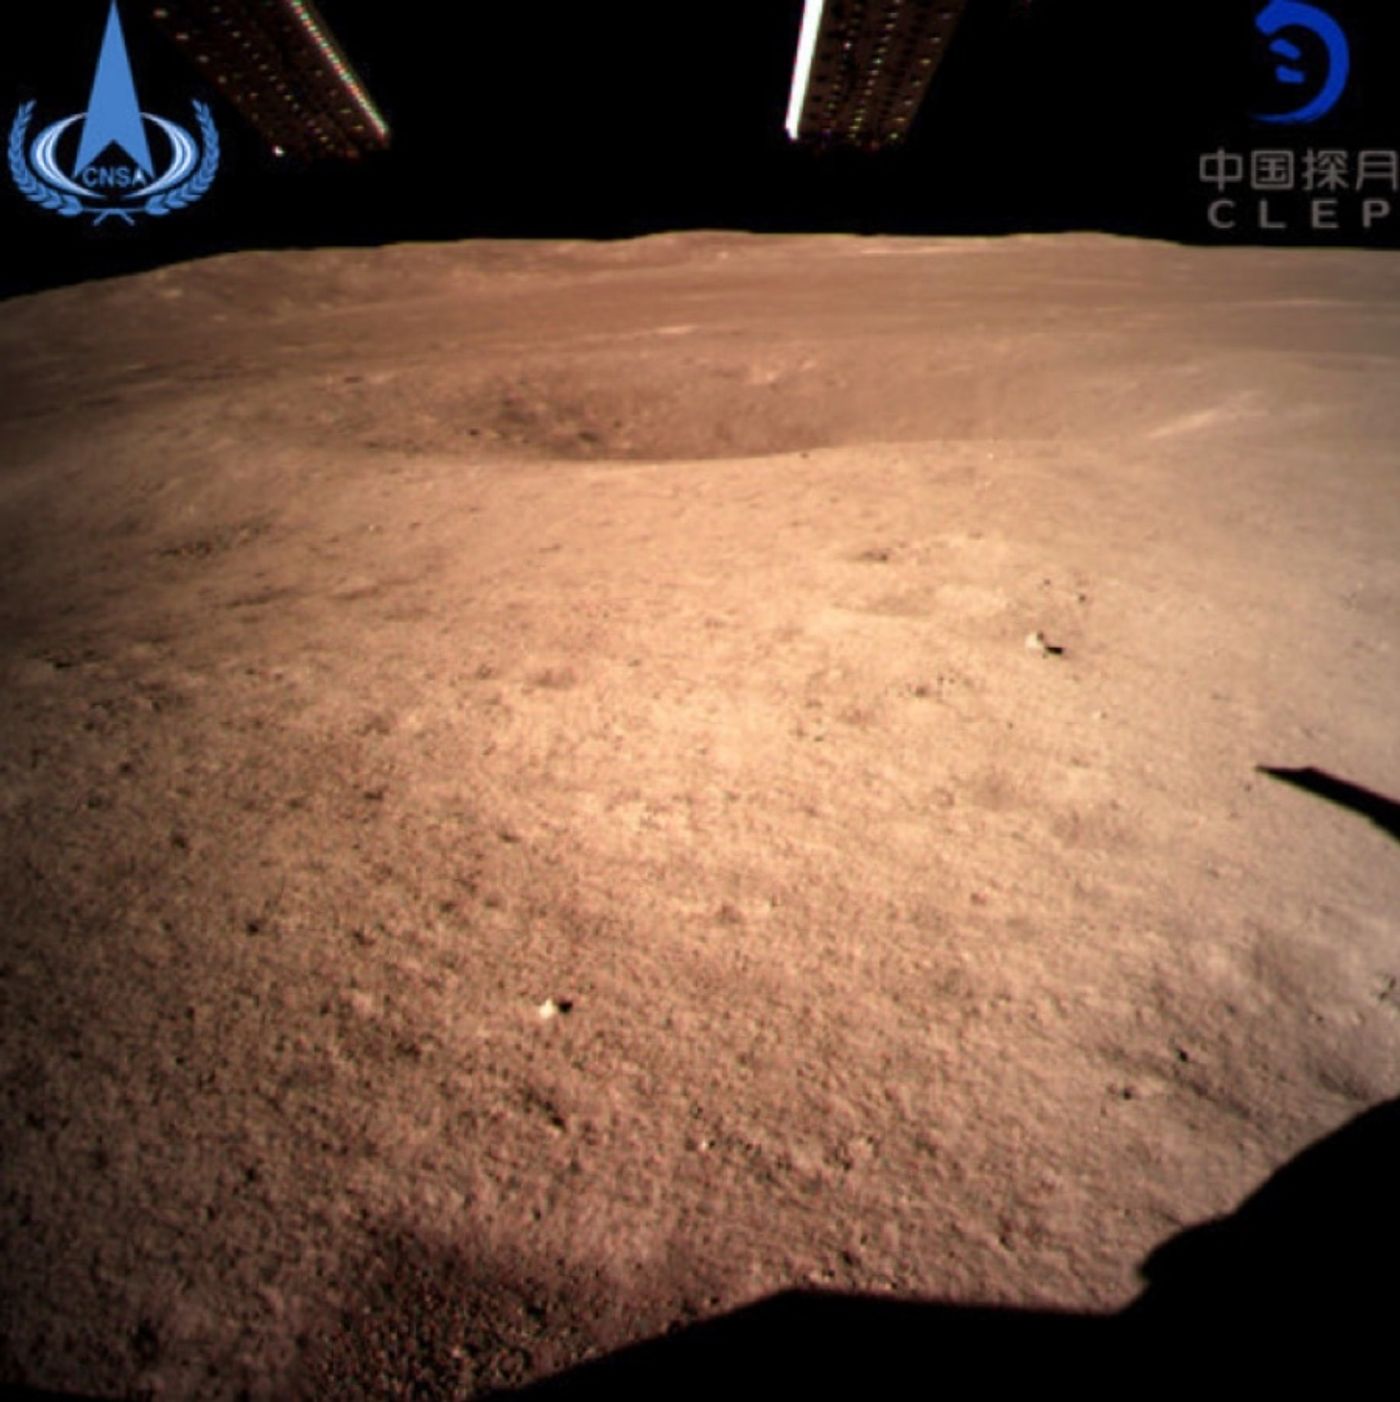 An image captured by China's lunar lander shortly after touching down on the Moon's 'Dark side.'